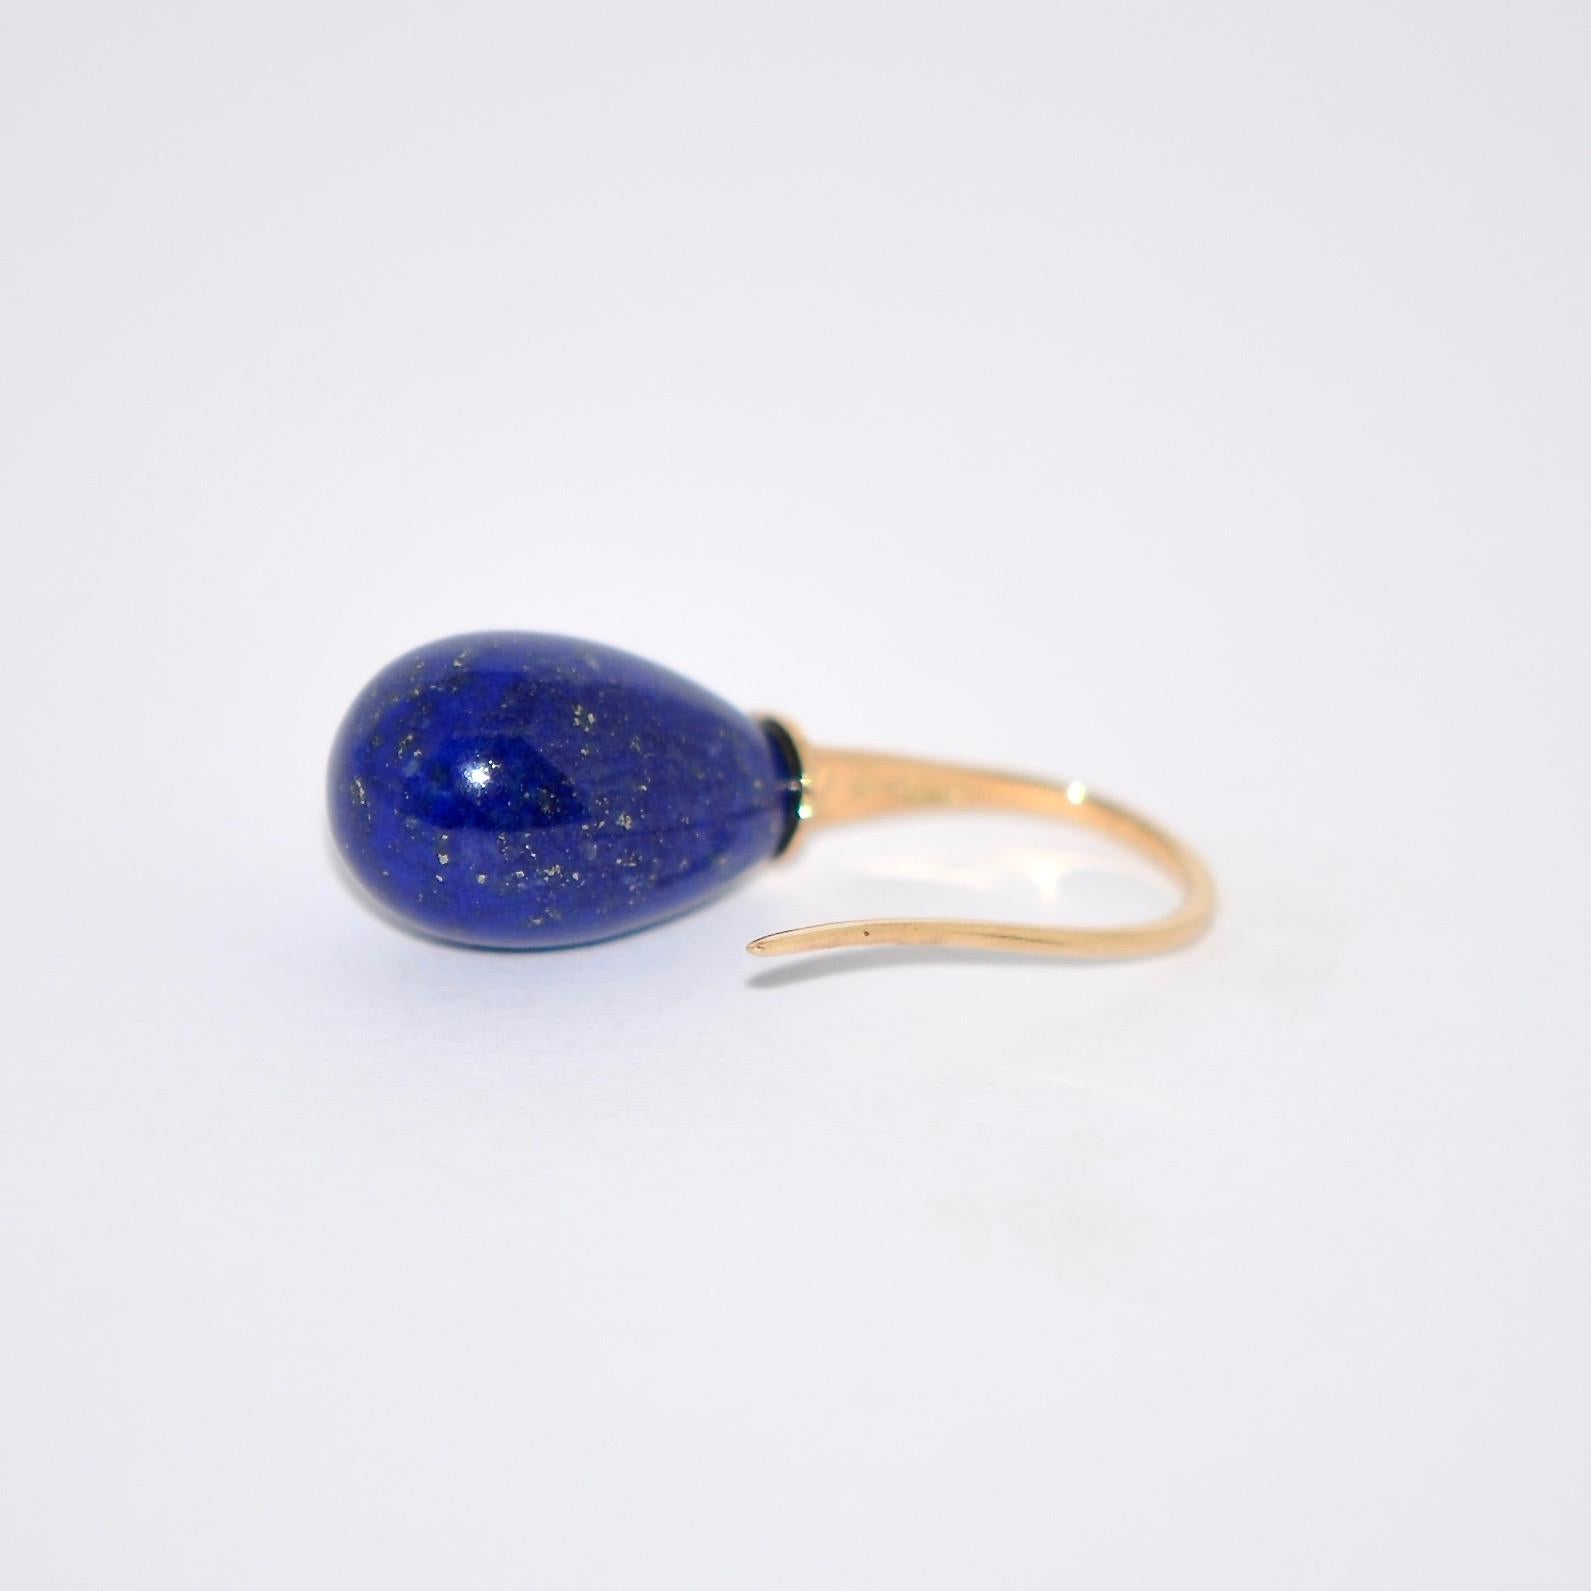 Discover this Lapis Lazuli and Yellow Gold 18 Karat Drop Earrings.
Lapis Lazuli
Yellow Gold 18 Karat 